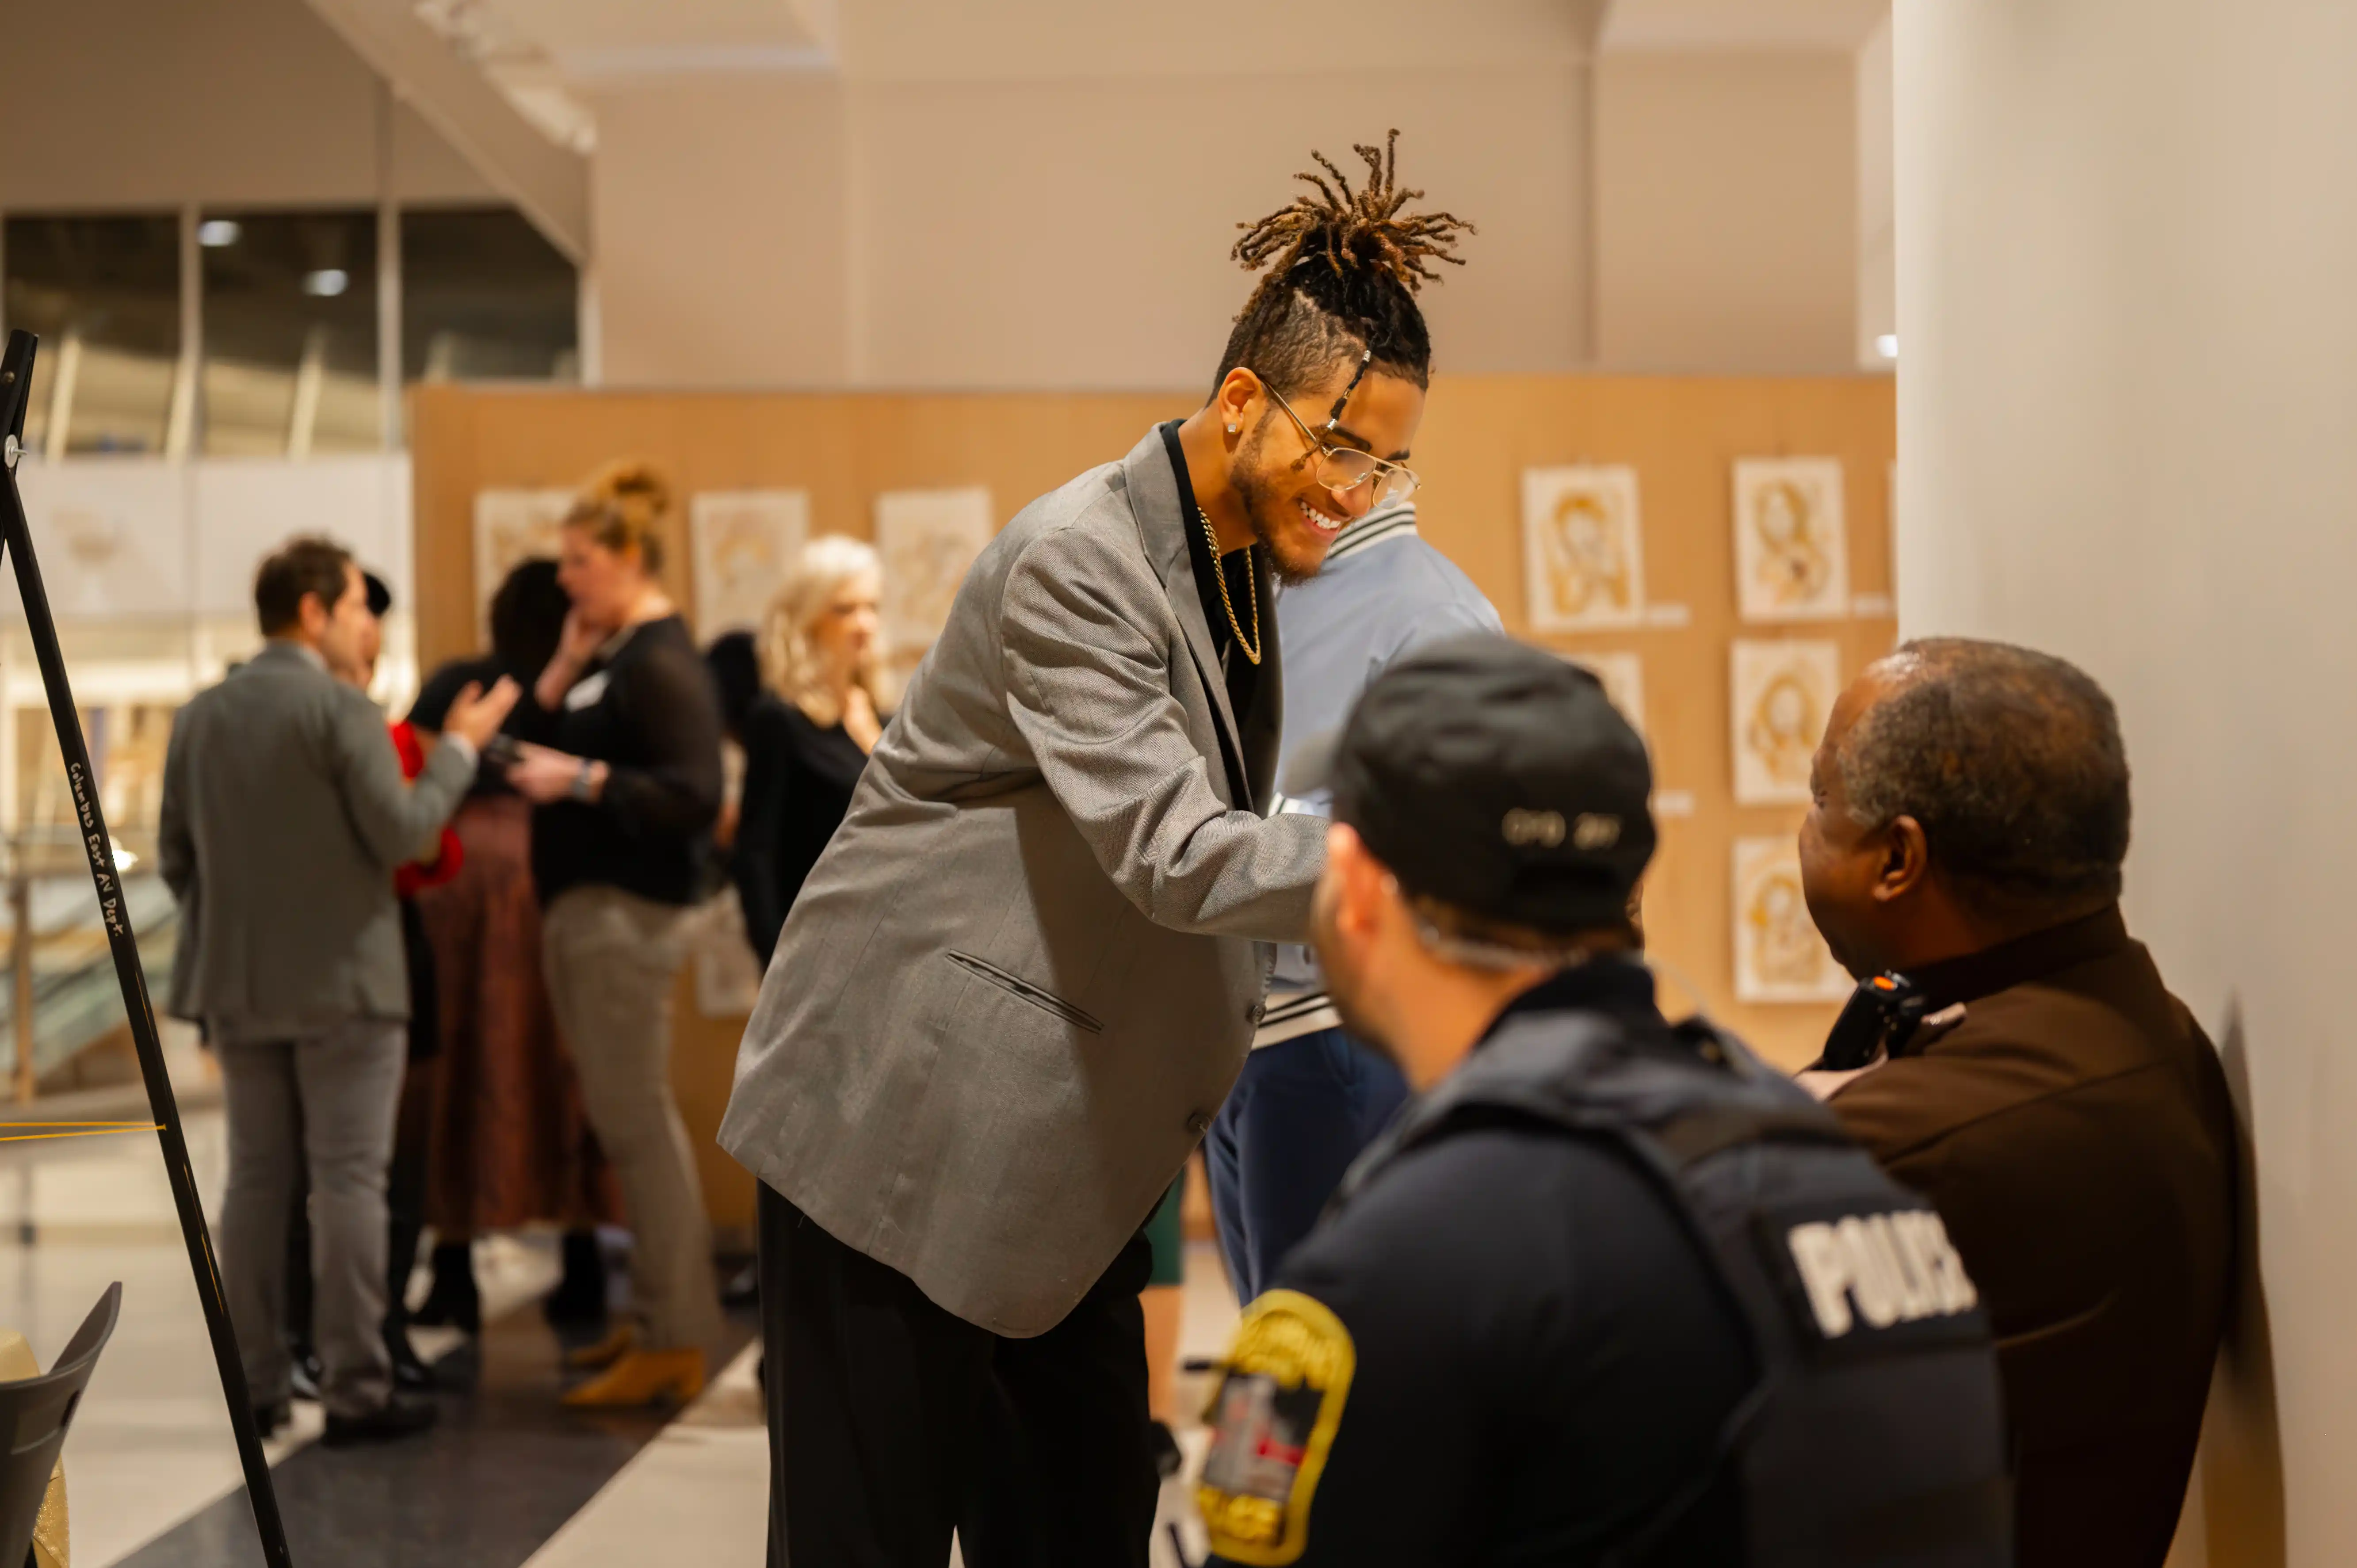 Guest at an art exhibition shaking hands with a security officer, with other attendees in the background.